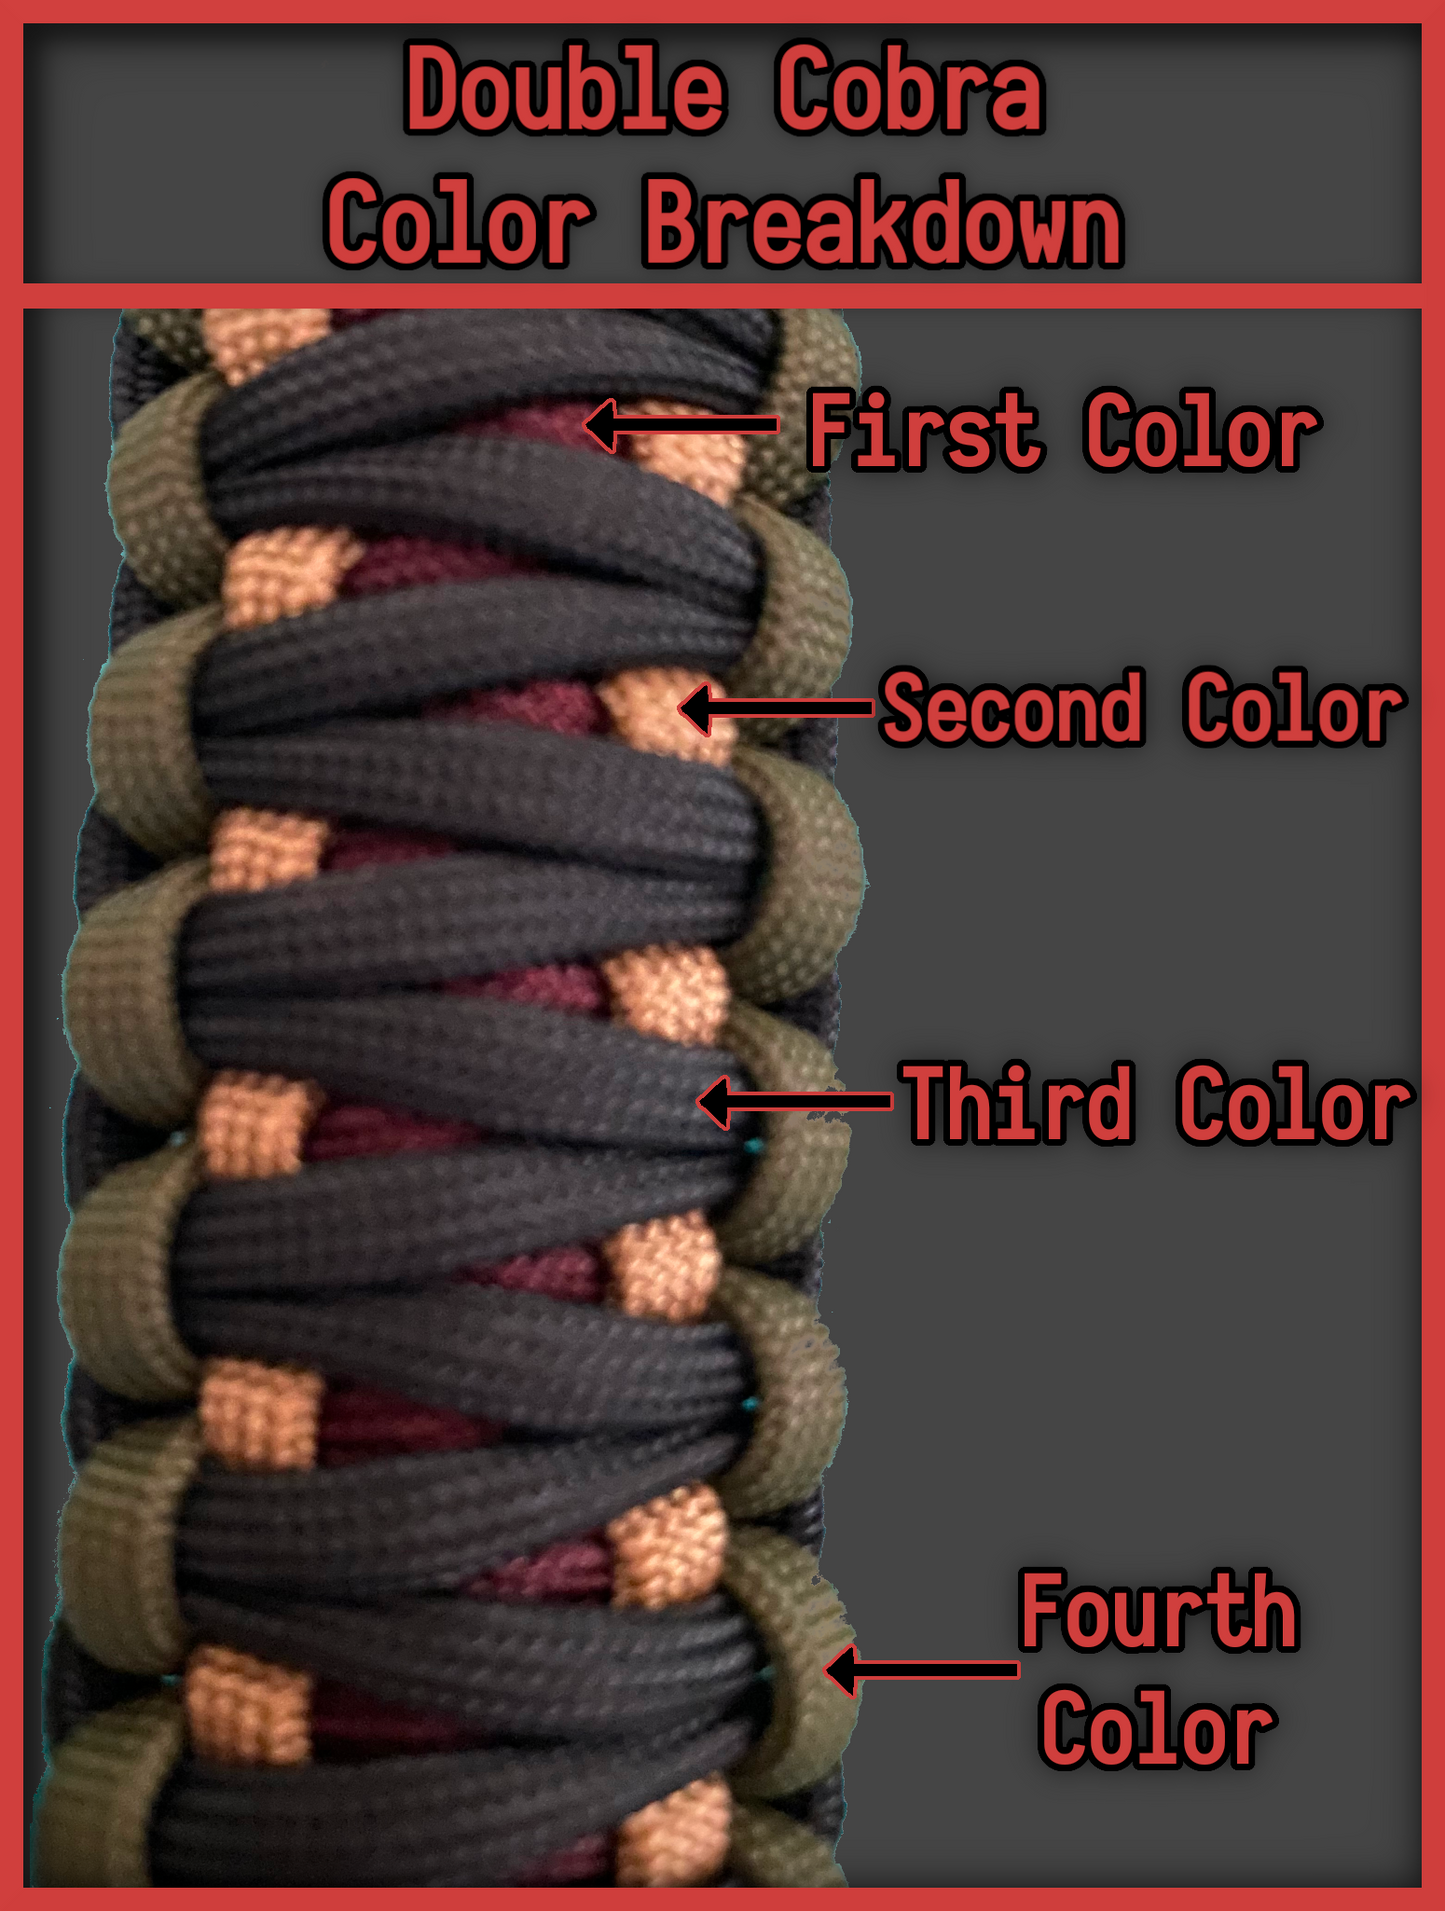 Custom Adjustable Paracord Double Cobra No-Drill Rifle Sling, Choose Your Colors and Stock Holder Type